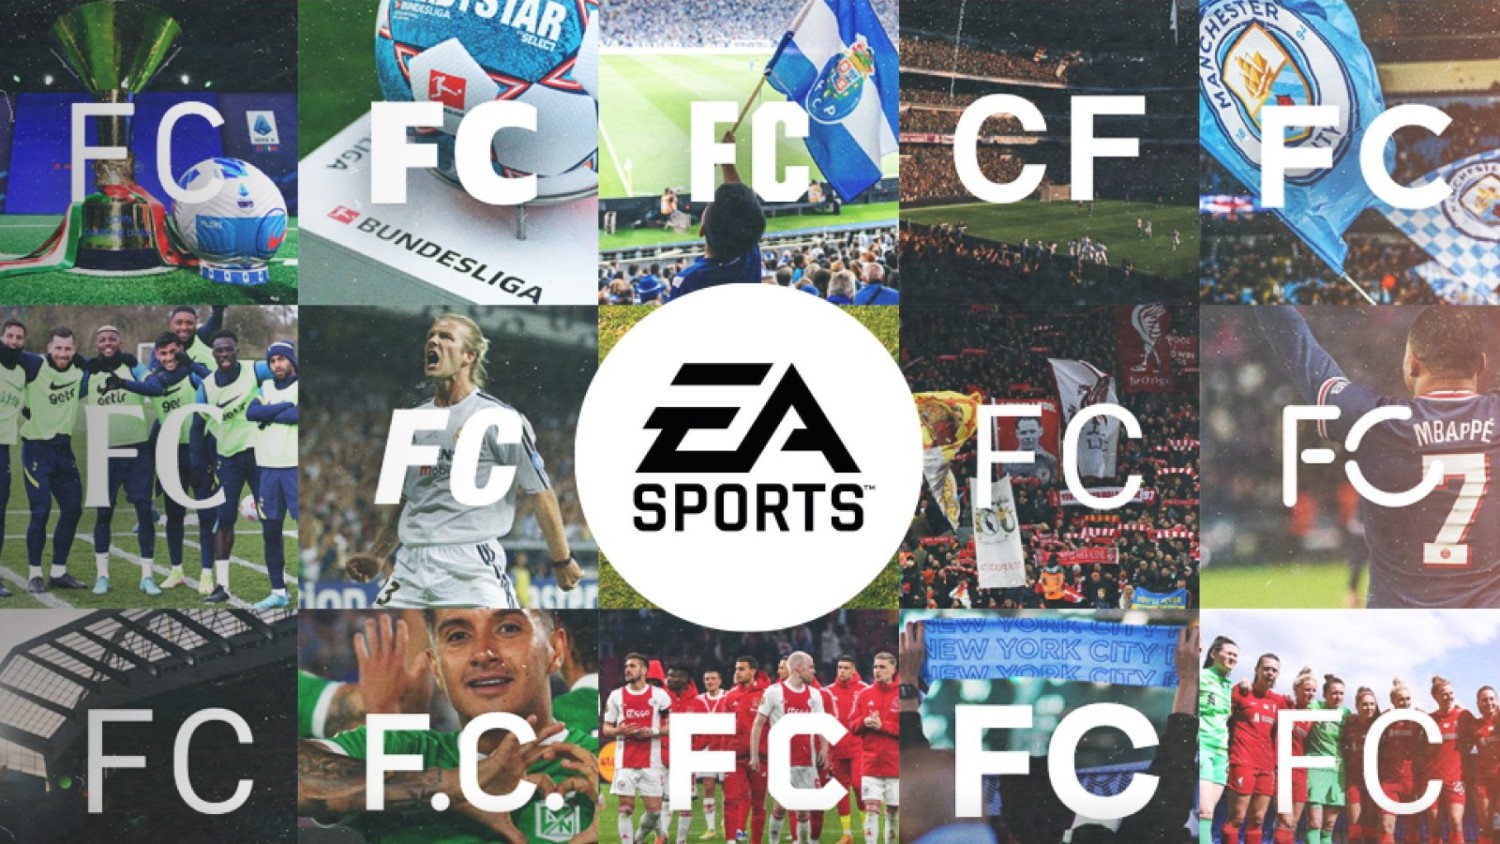 EA Sports FC 24 sees 11.3 million players in its first week